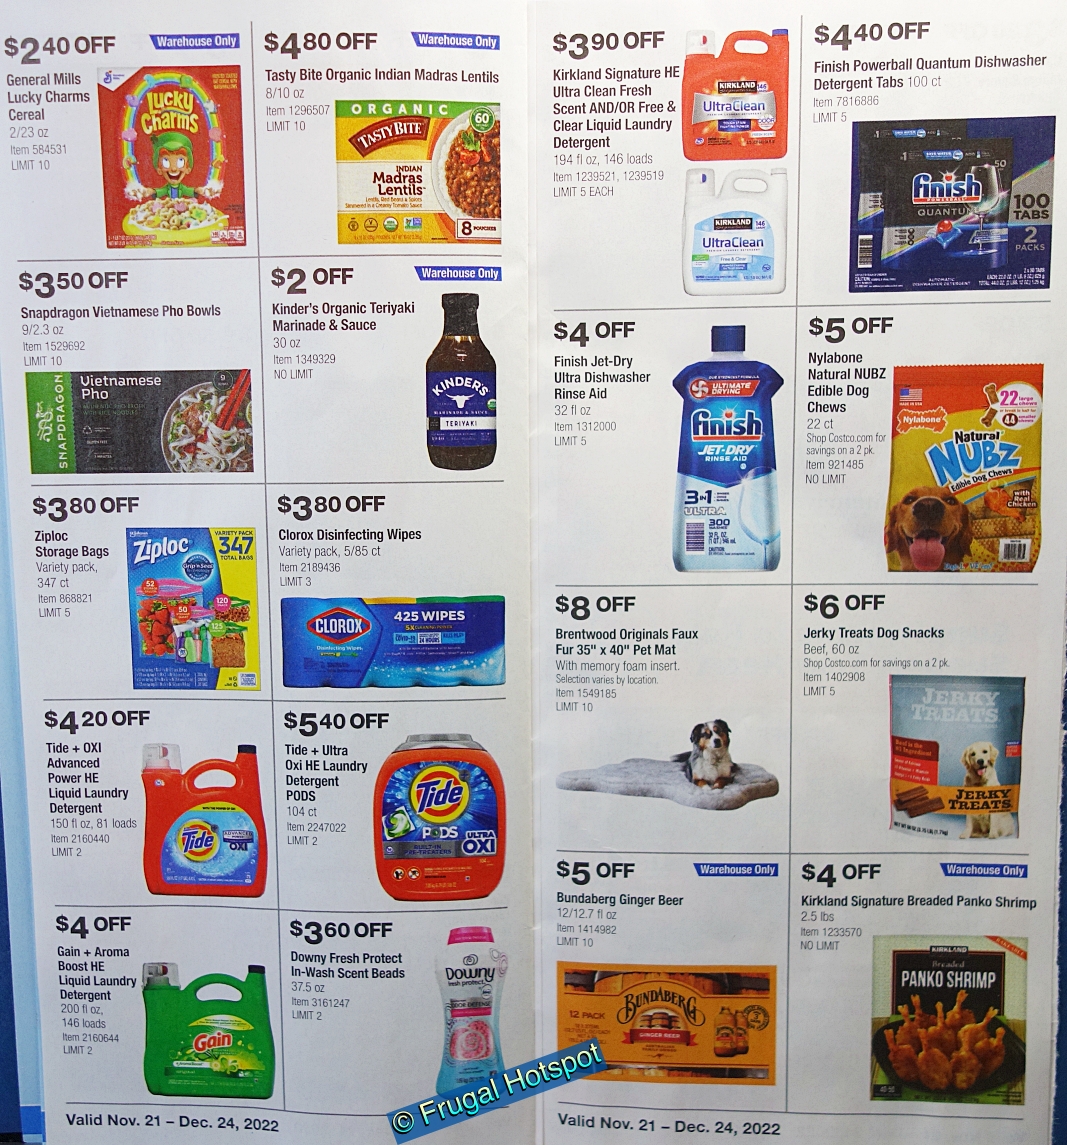 Costco Coupon Book DECEMBER 2022 | Pages 18 and 19